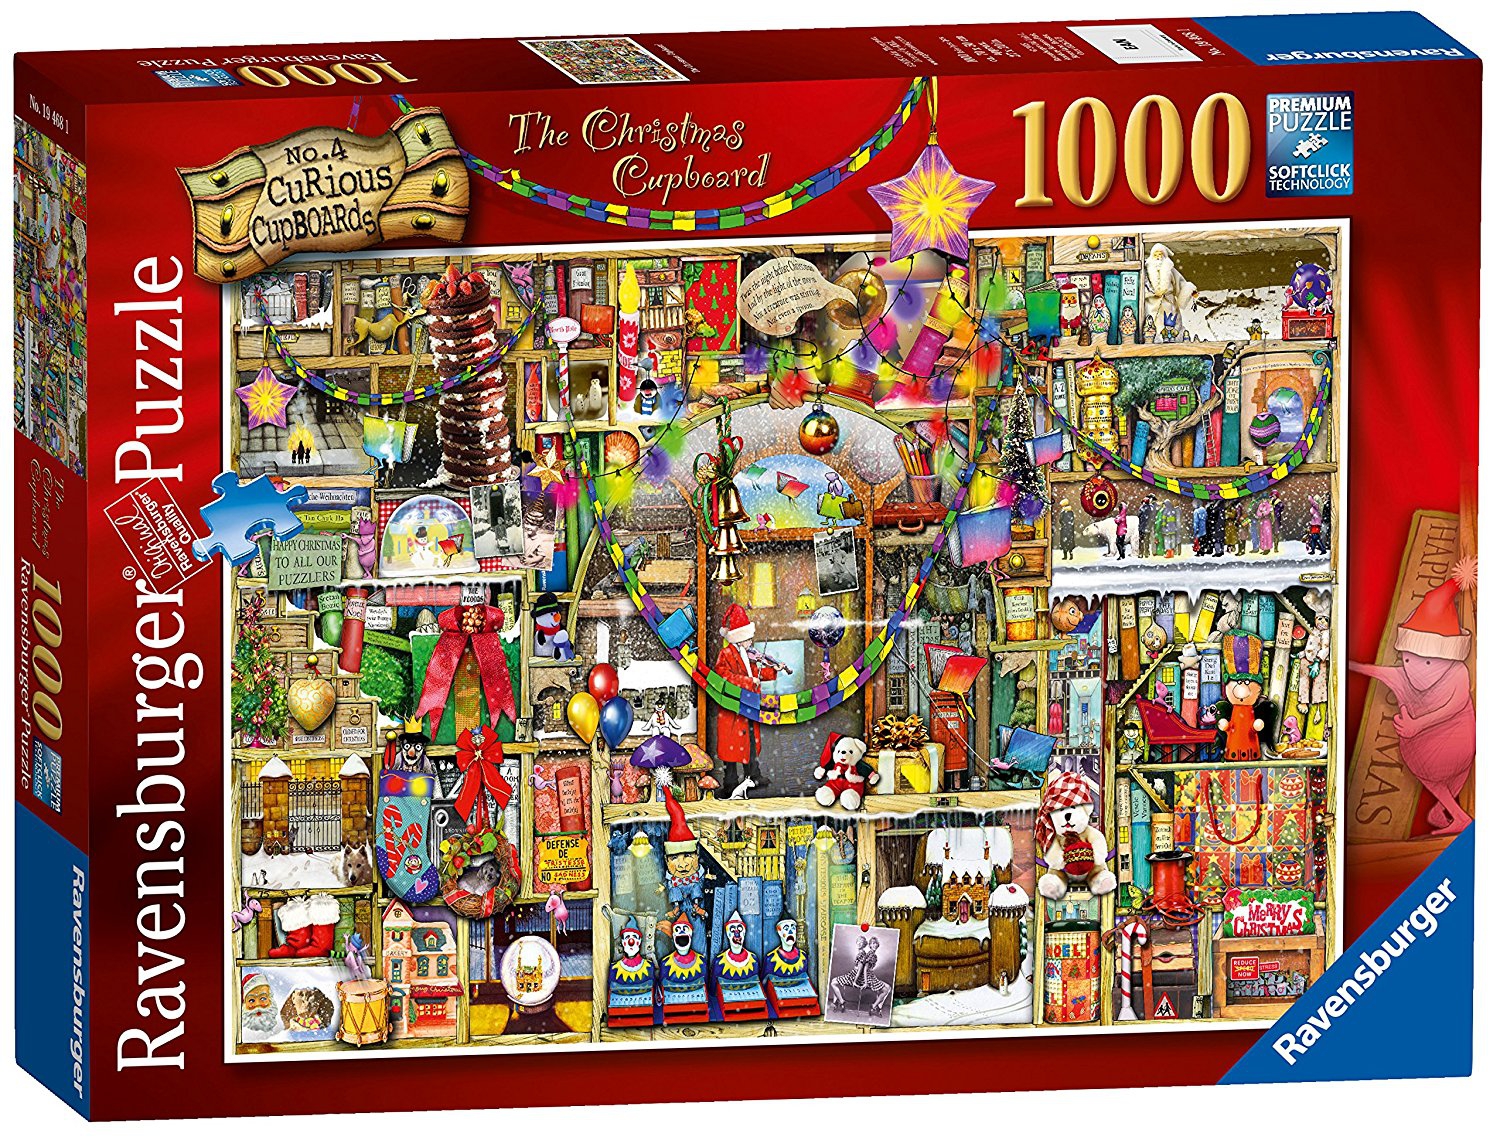 The Christmas Cupboard 1000 Piece Jigsaw Puzzle Game